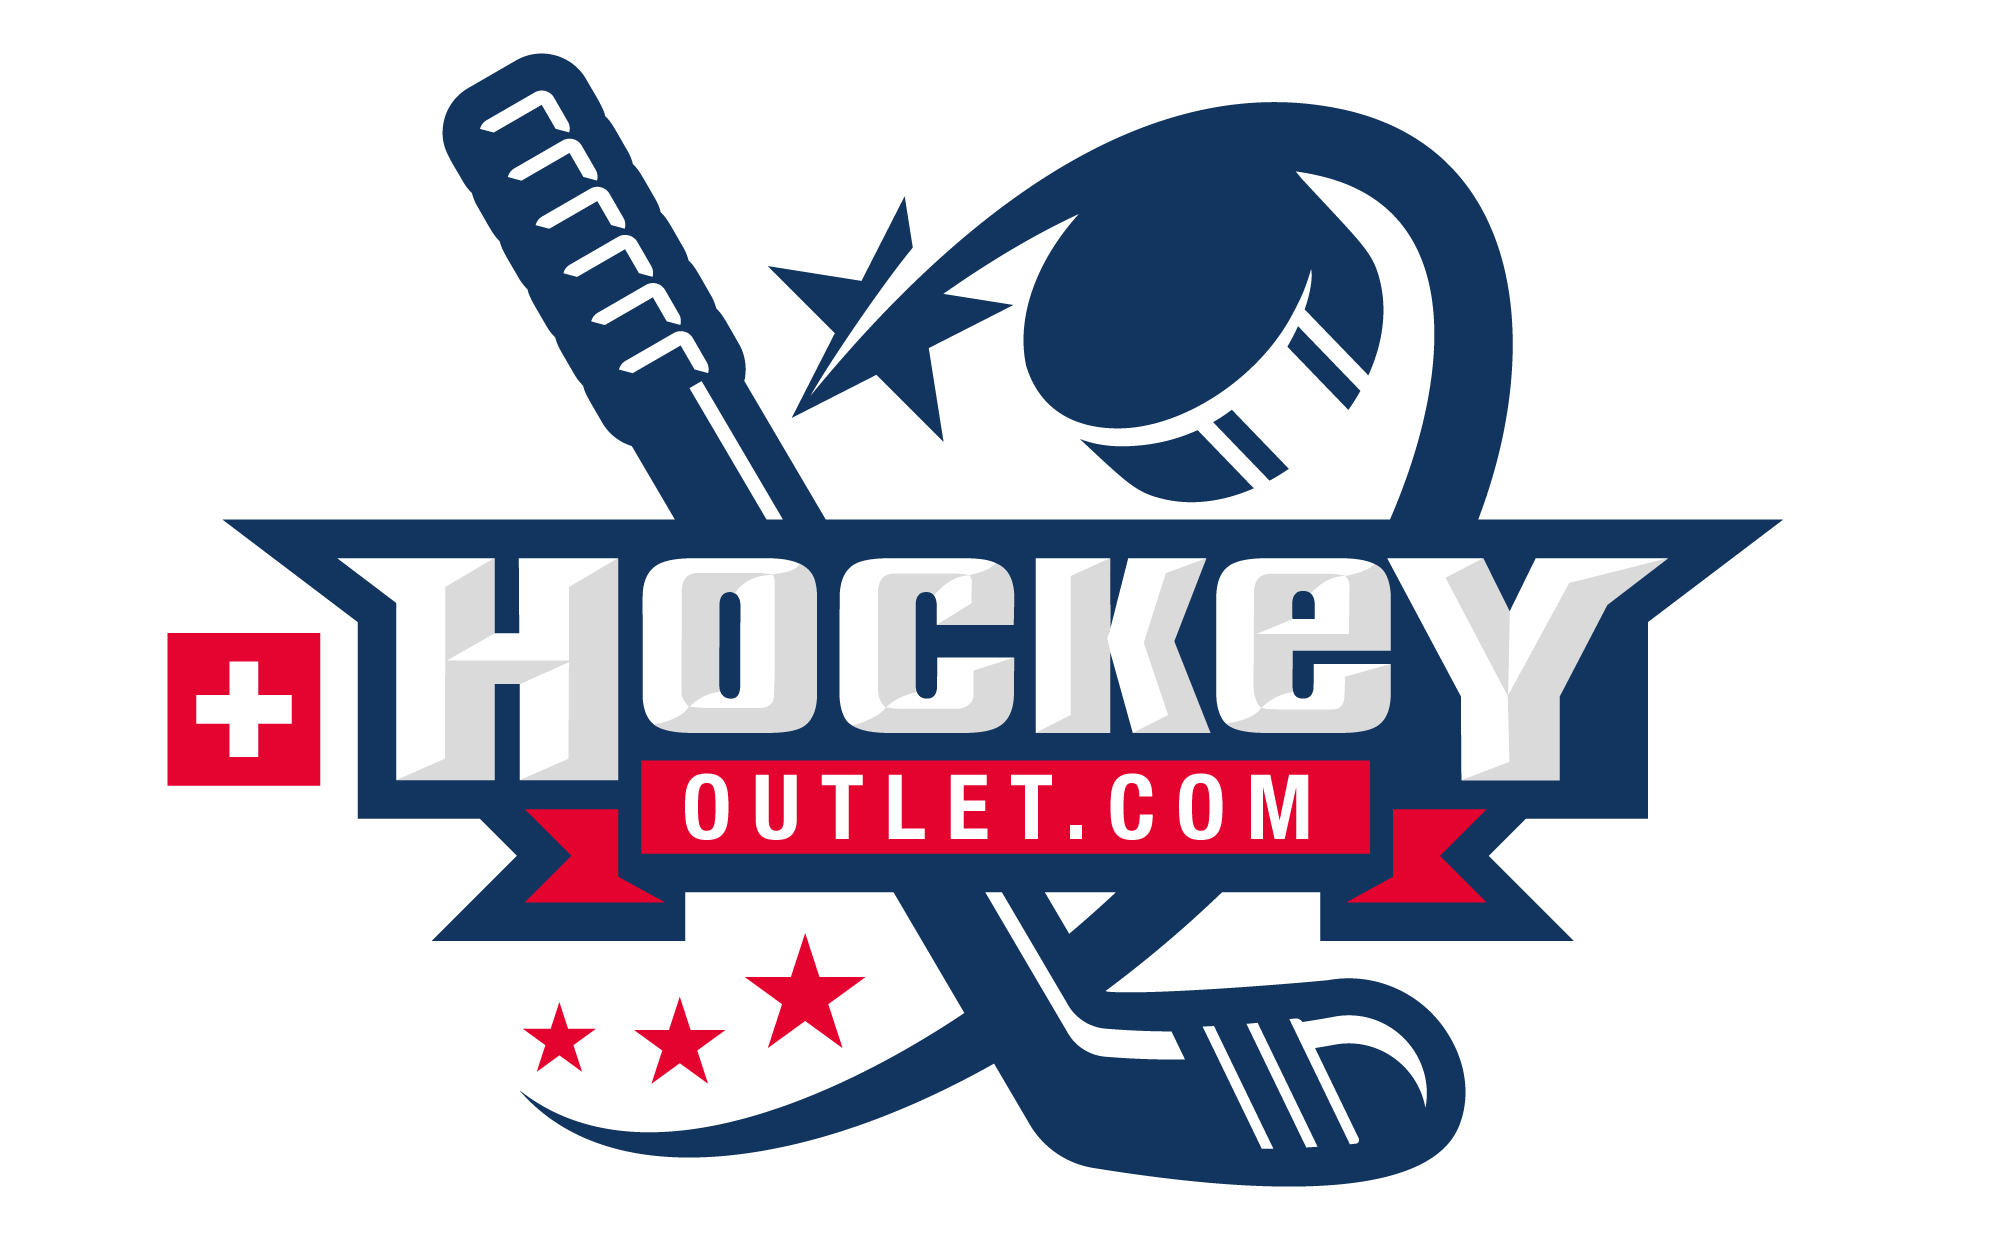 Swiss Hockey Outlet